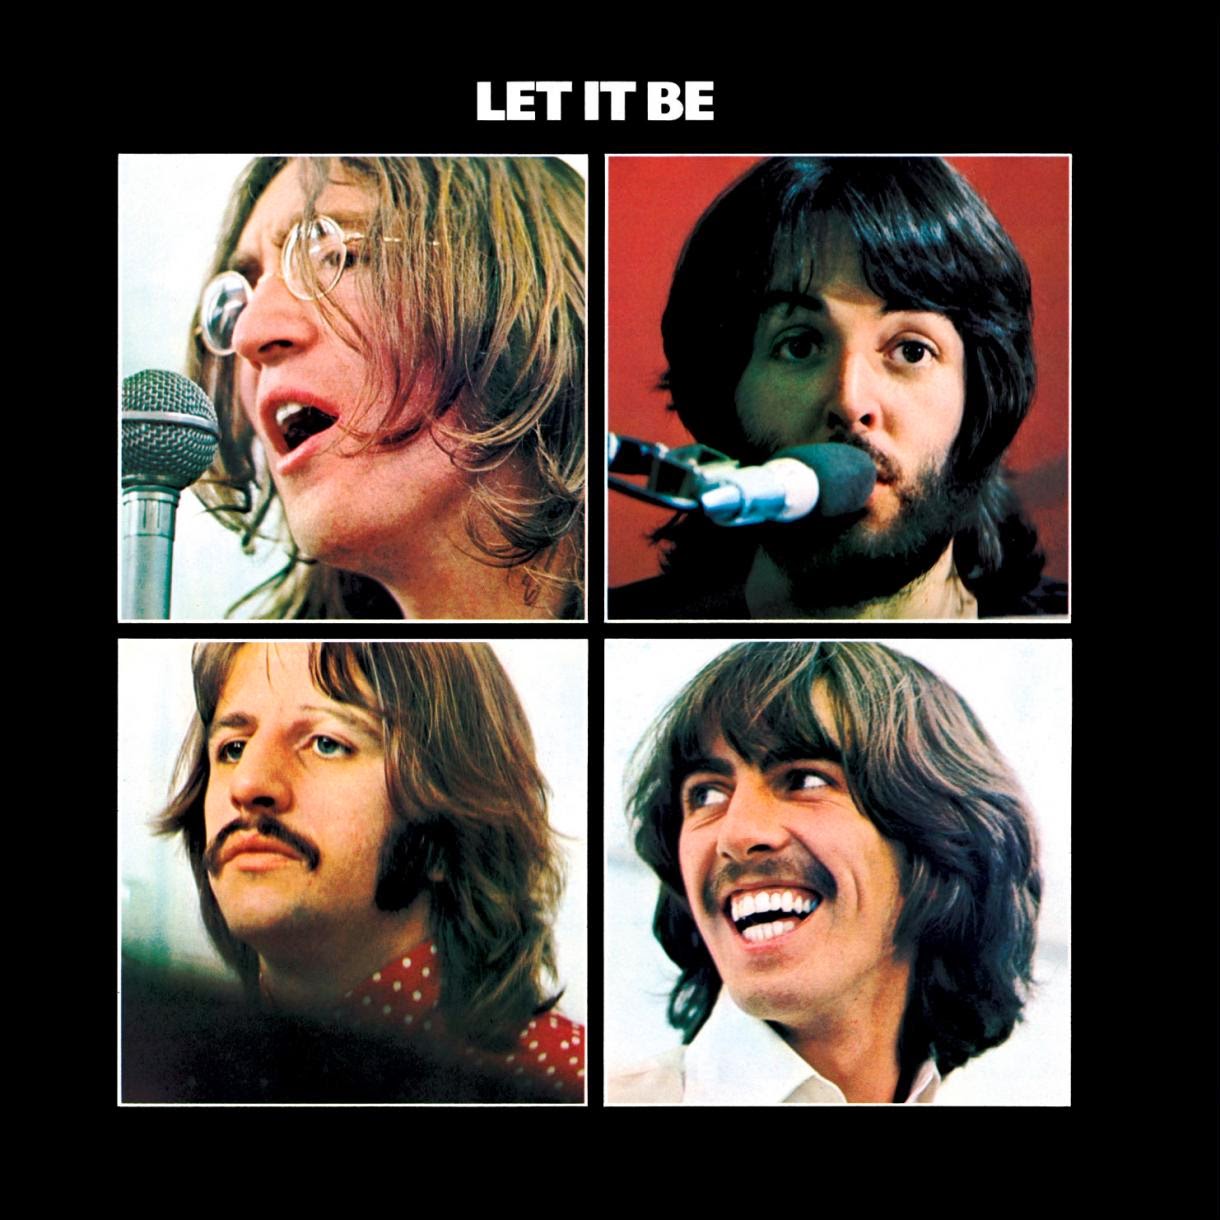 "Let It Be" by The Beatles album cover. Various pictures on each band member during performances fill the cover.